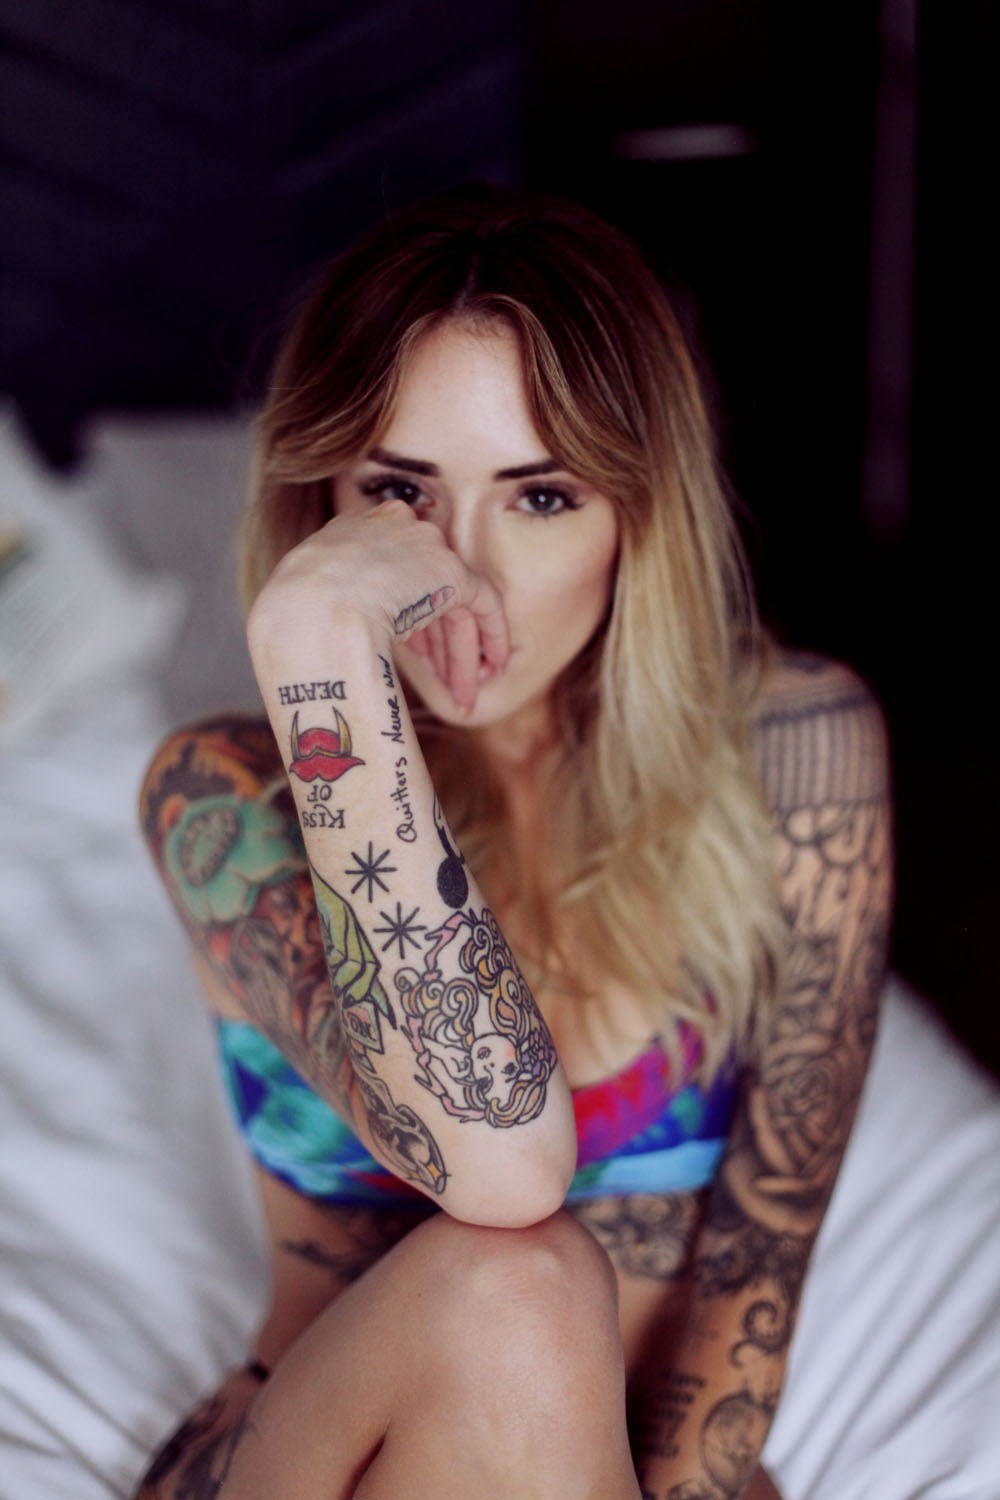 White girl with tattoos does